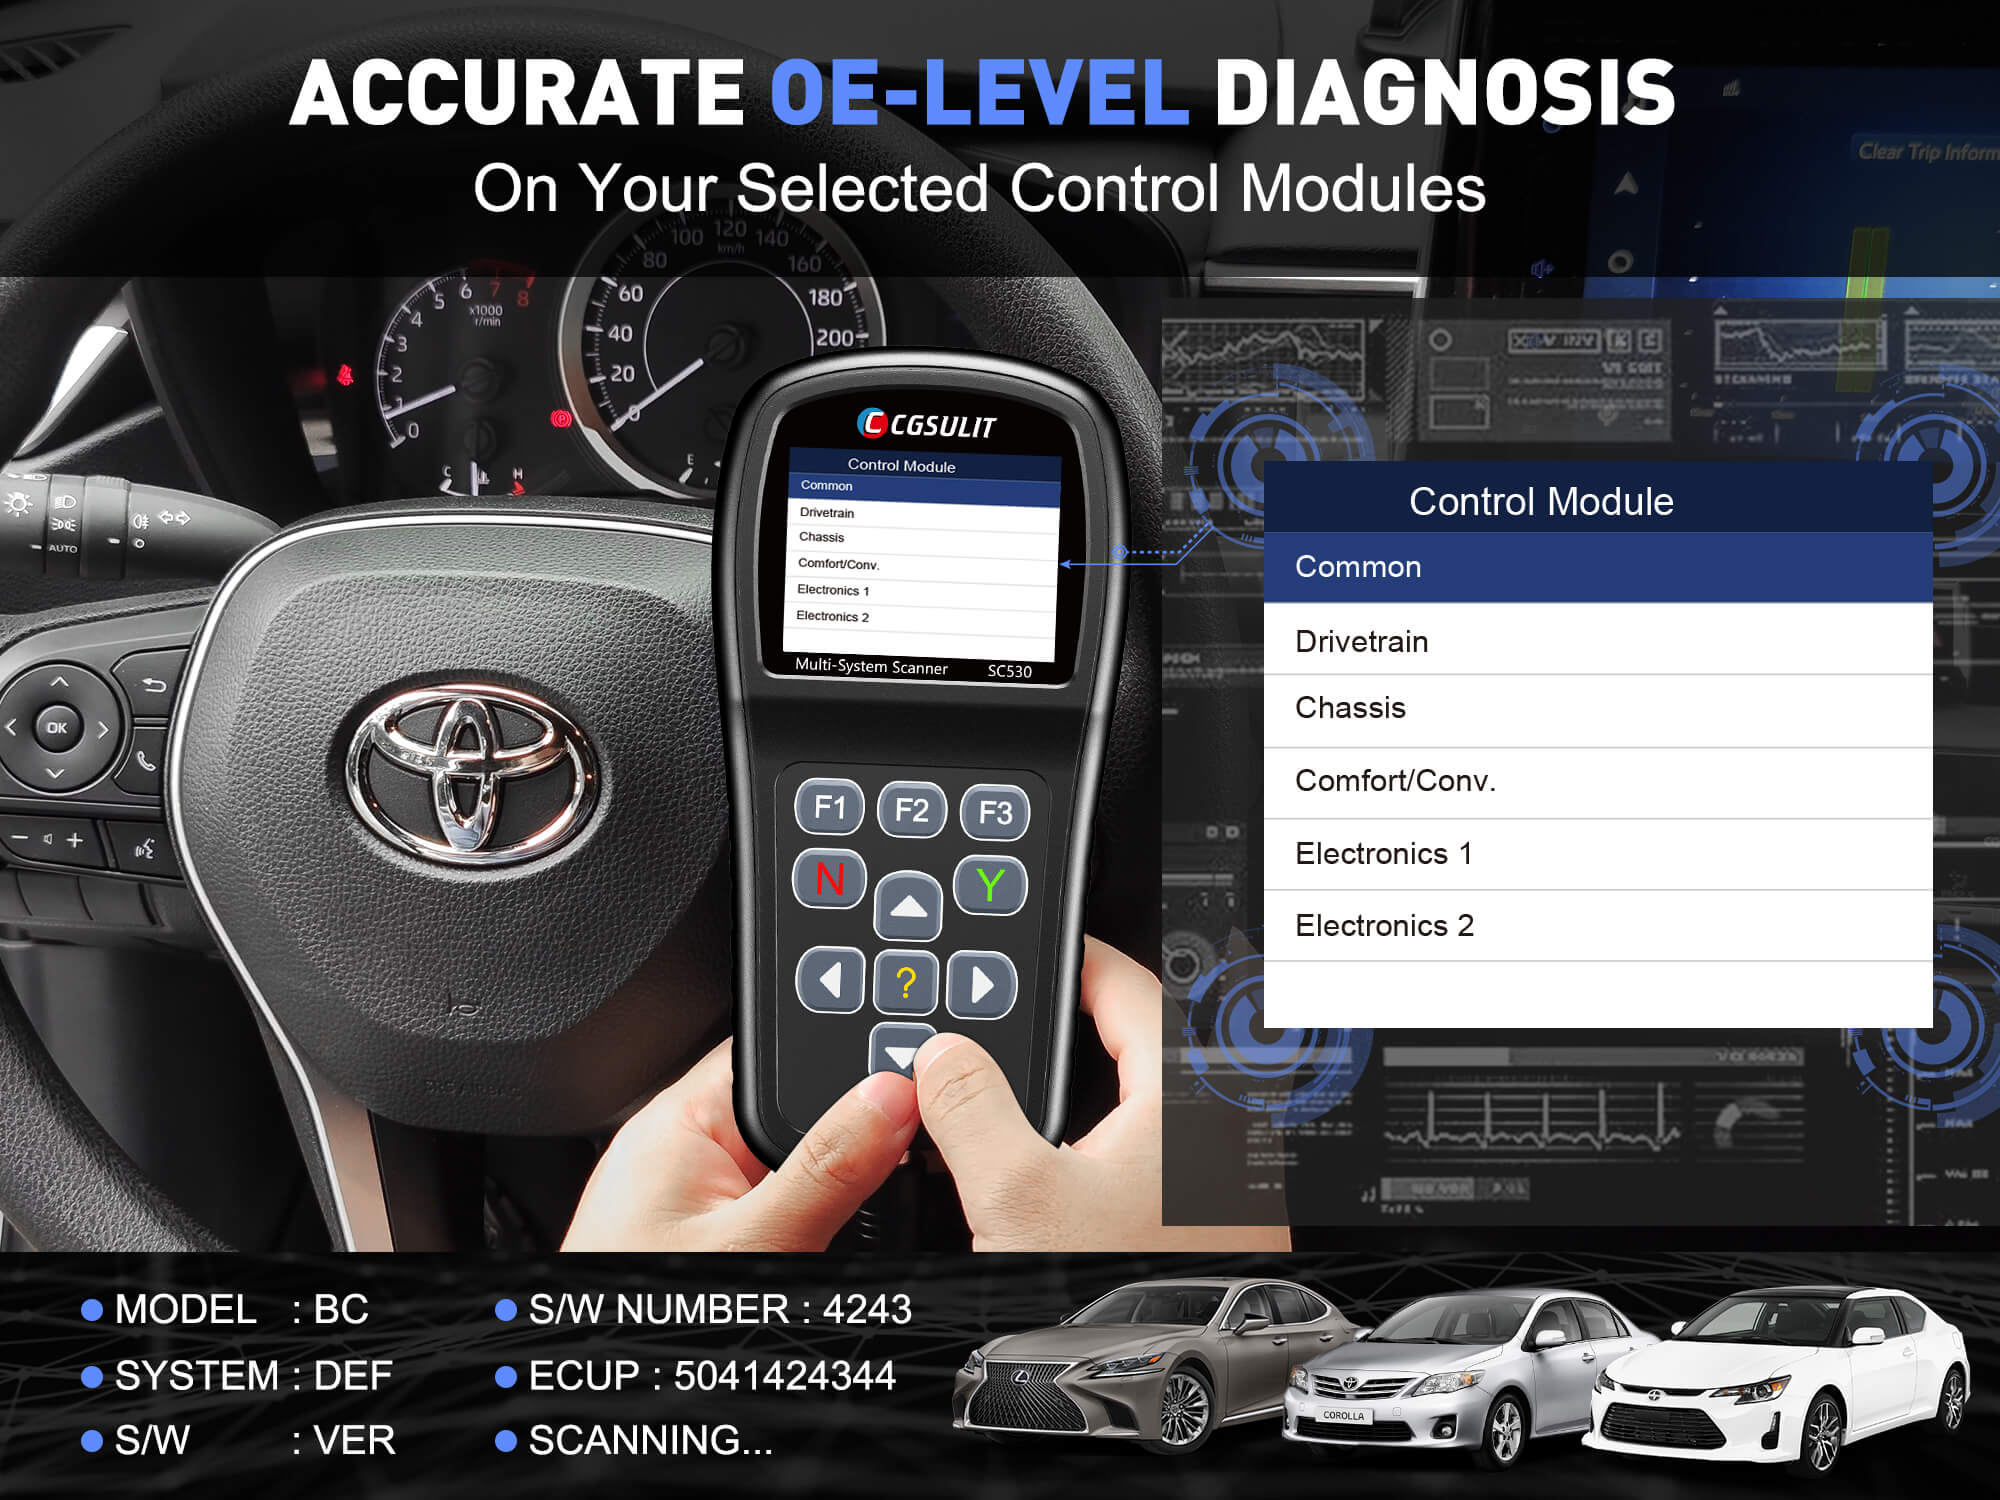 SC530 OE-Level scanner performs an automatic system test to determine which control modules are installed on the vehicle and provides diagnostic trouble codes overview.